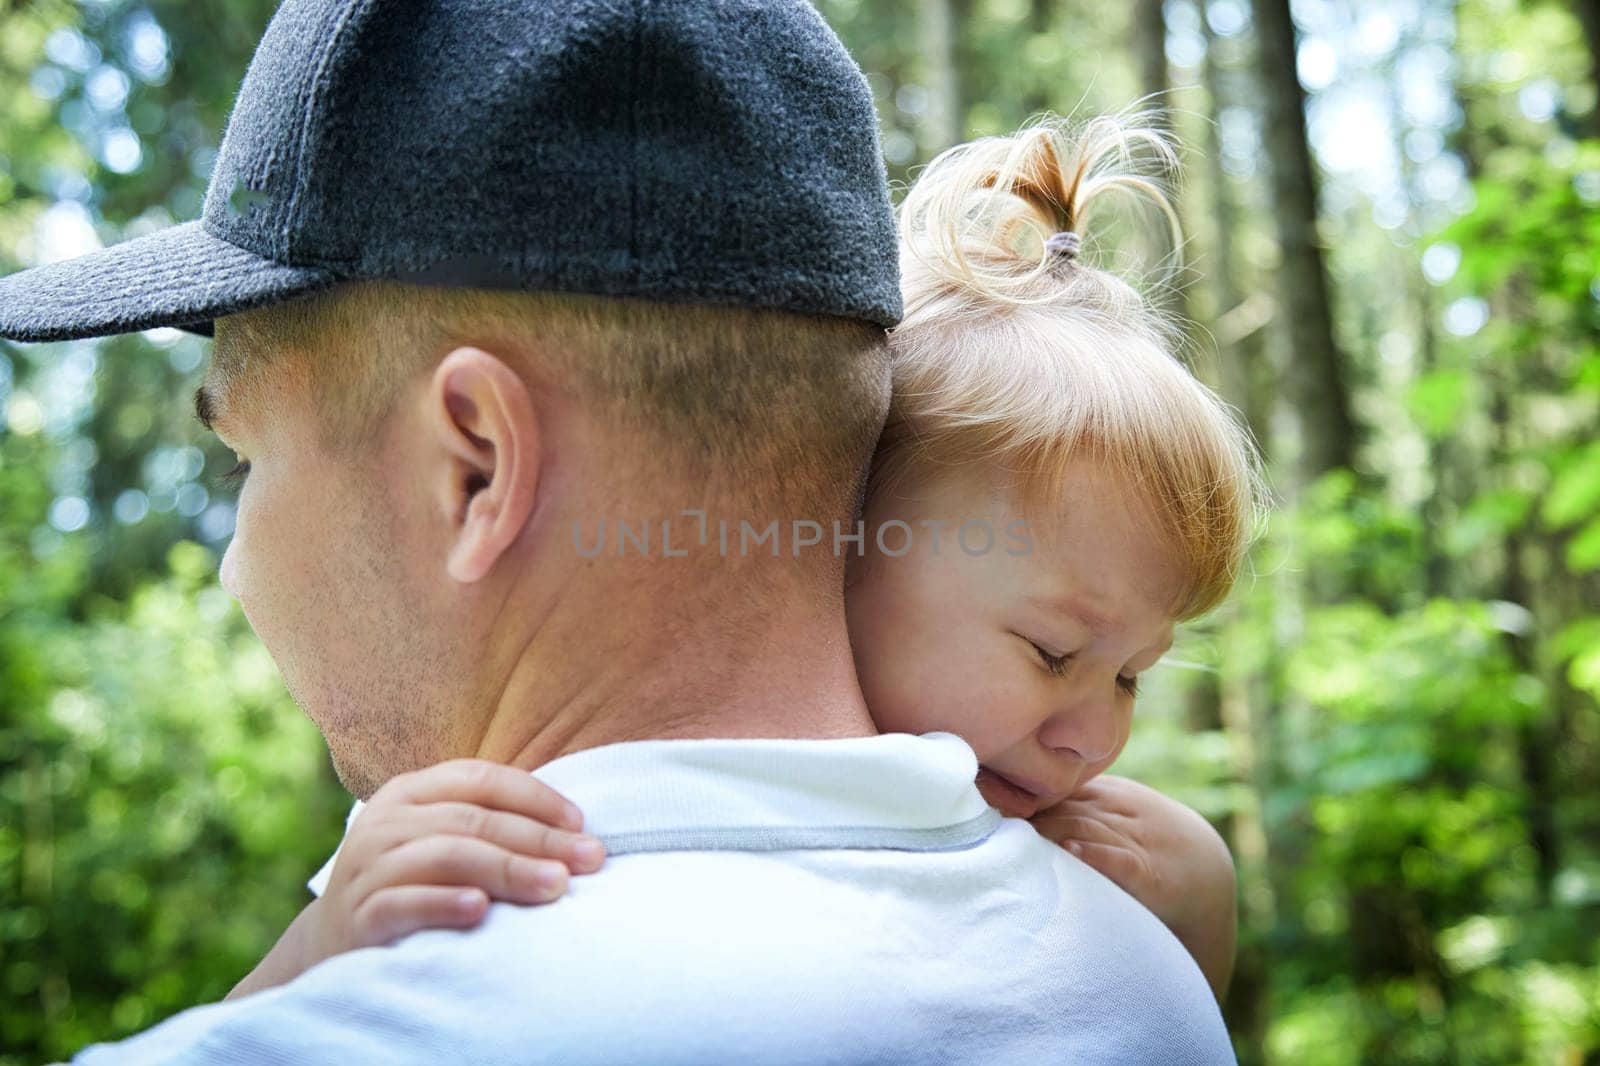 Gentle Father Holding Young Daughter Outdoors in Daylight. A tender moment as dad embraces his little girl in a sunny garden